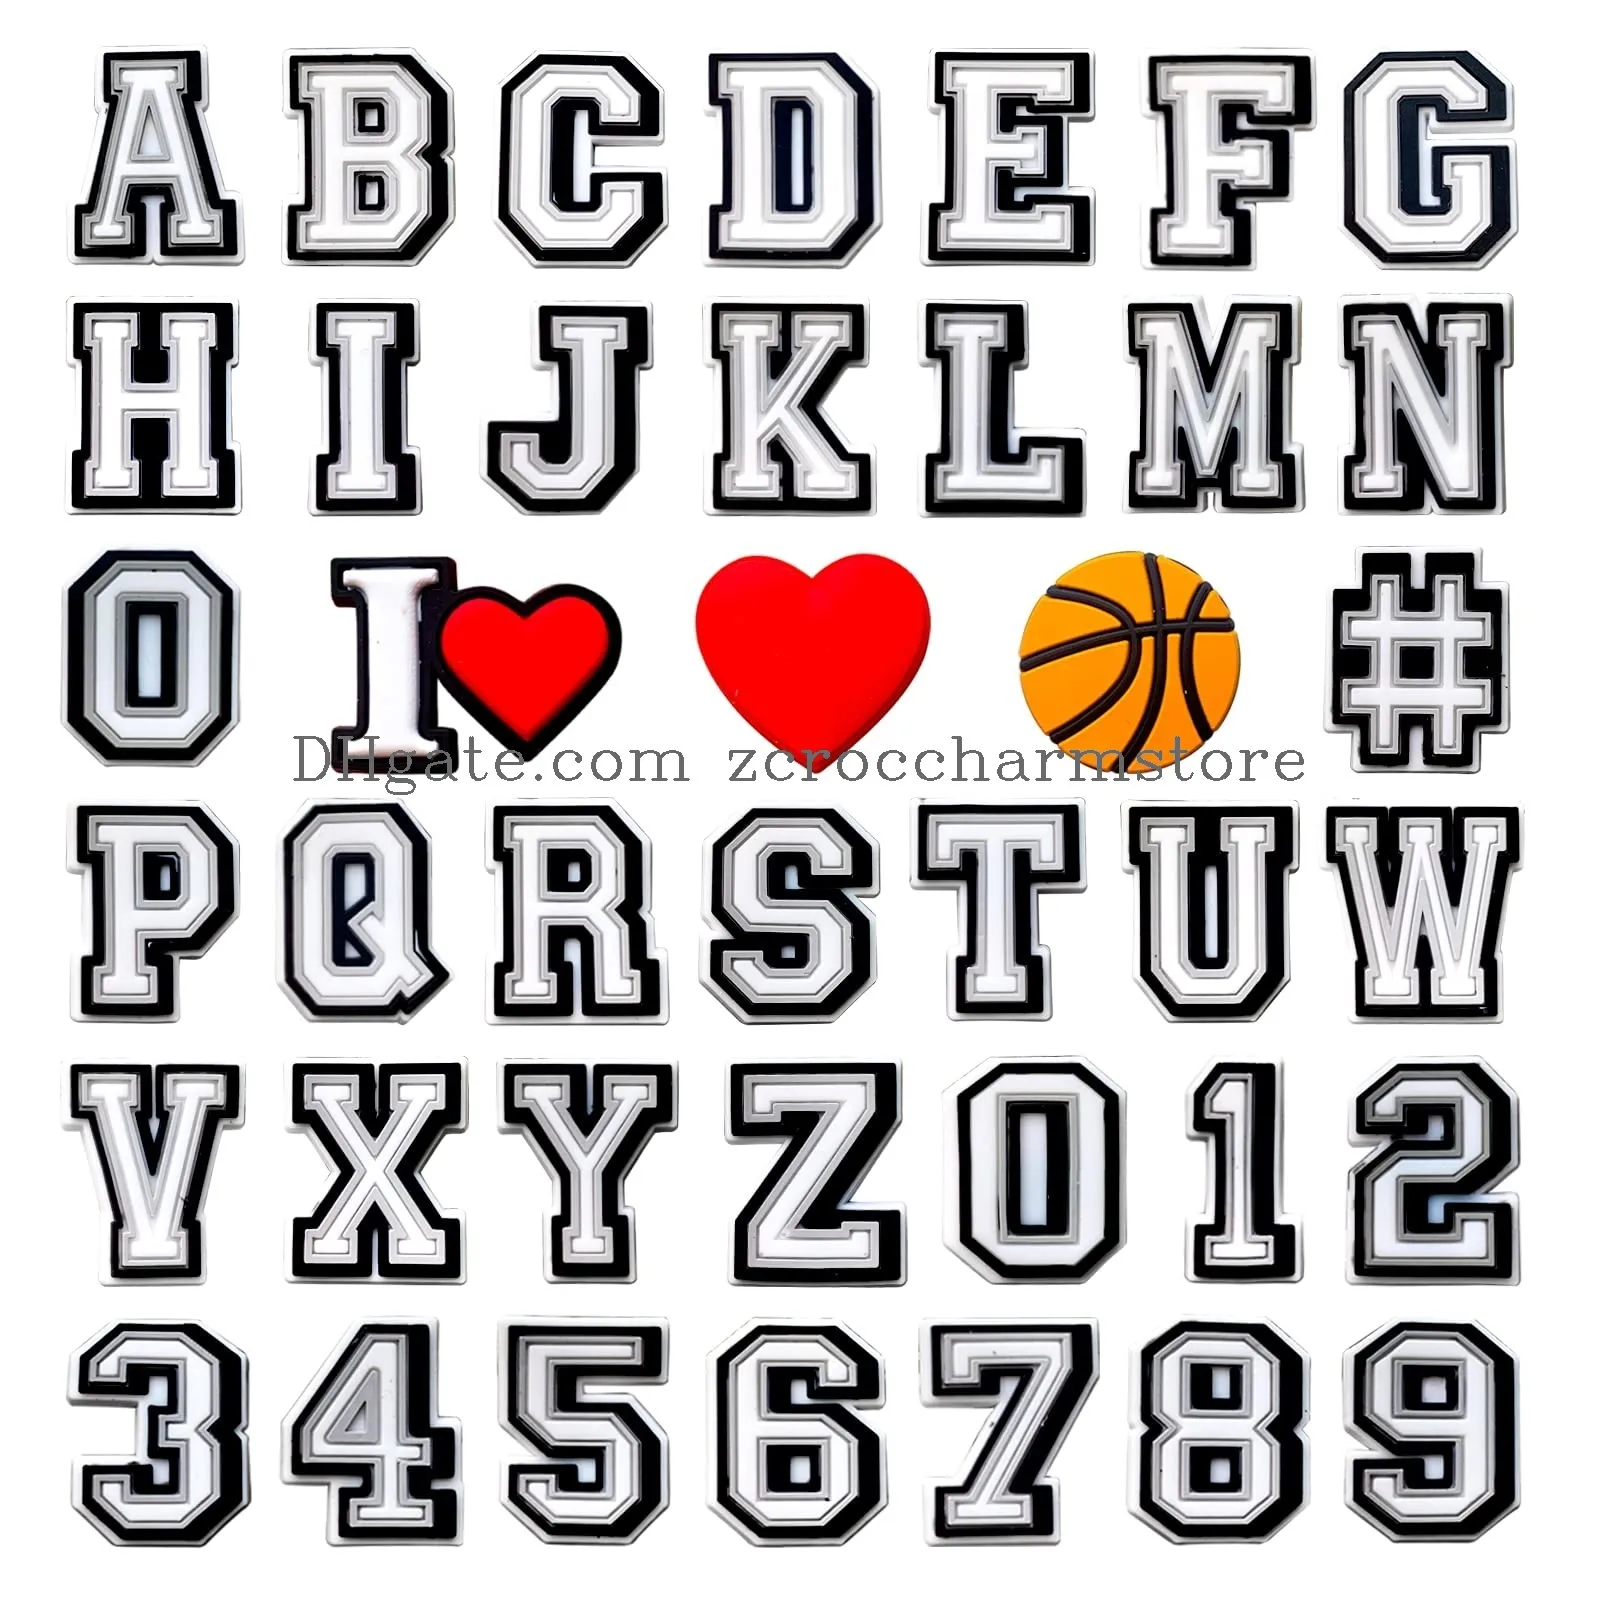 letter clog charms pack for clog shoe decoration 0-9 number alphabet abc-z characters love heart basketball designer shoes accessories pins for boys girls kids teens men women and adults party favor birthday gift pvc